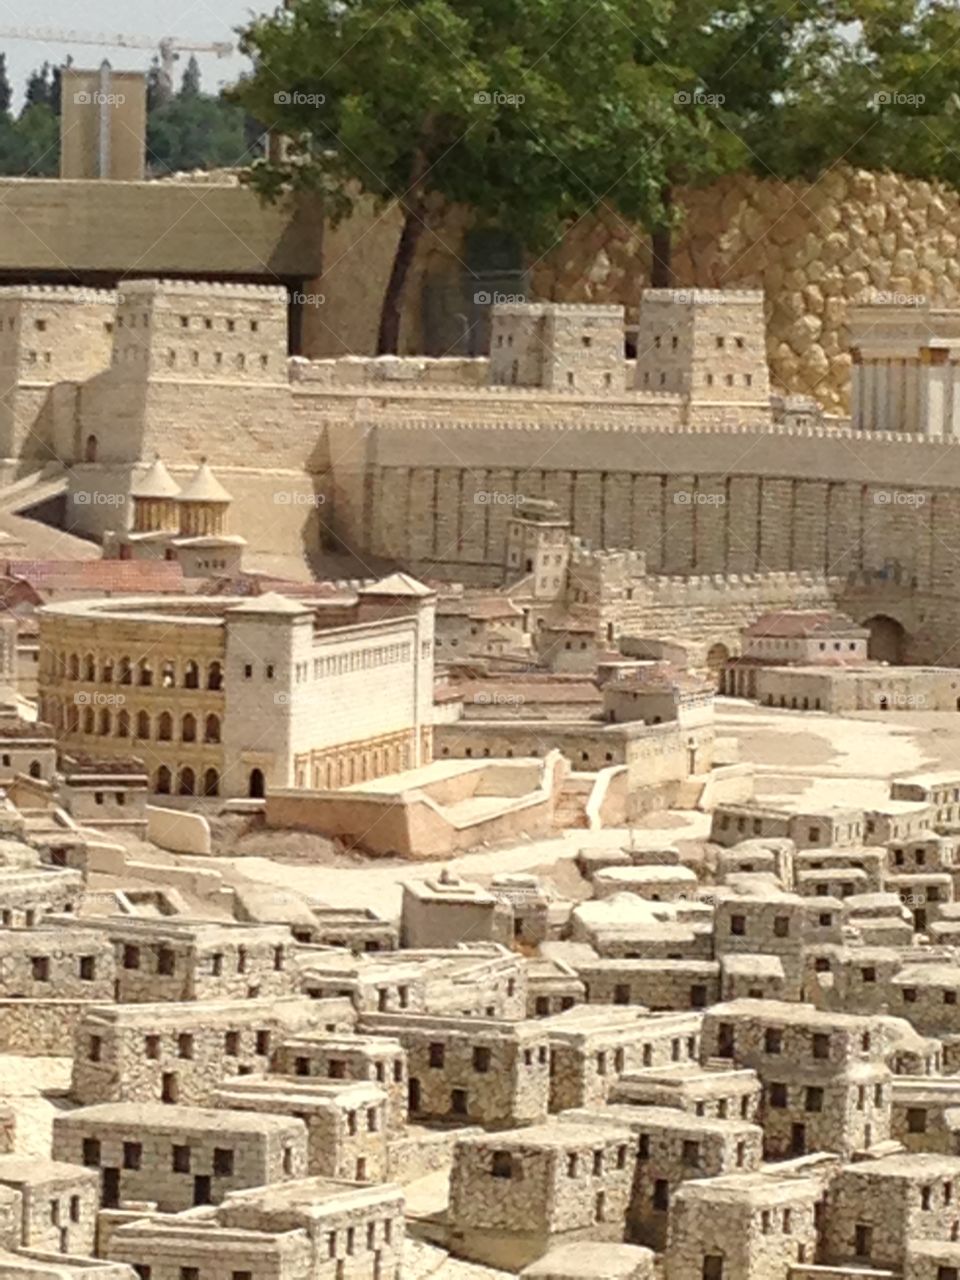 Second temple